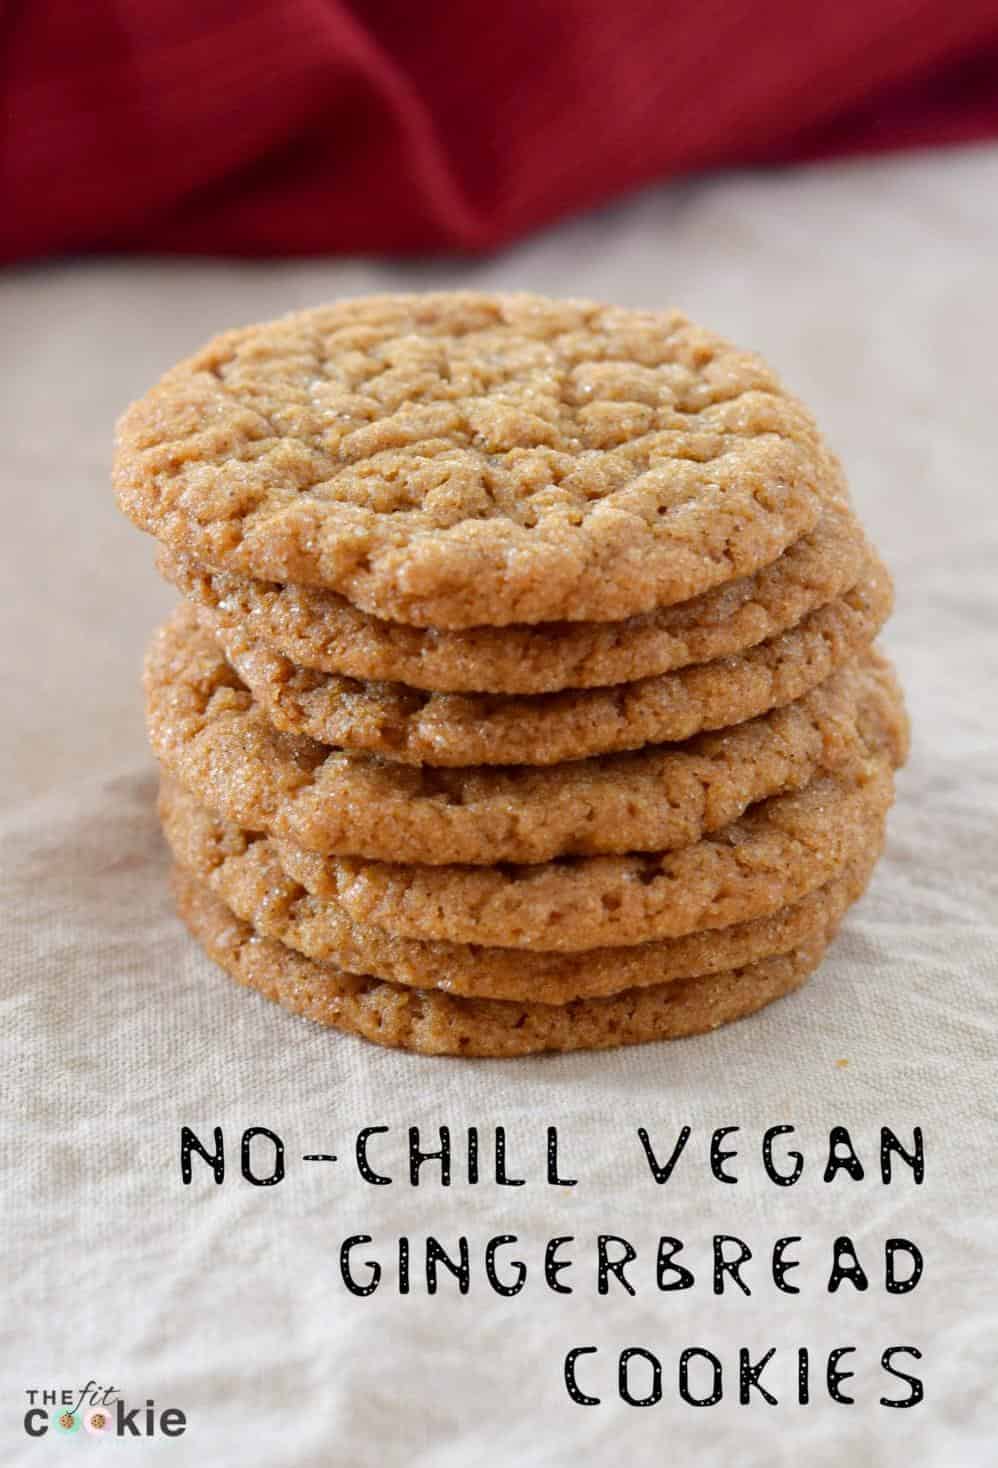 Sure, here are 11 unique photo captions for the Vegan No-Chill Gingerbread Cookies recipe: